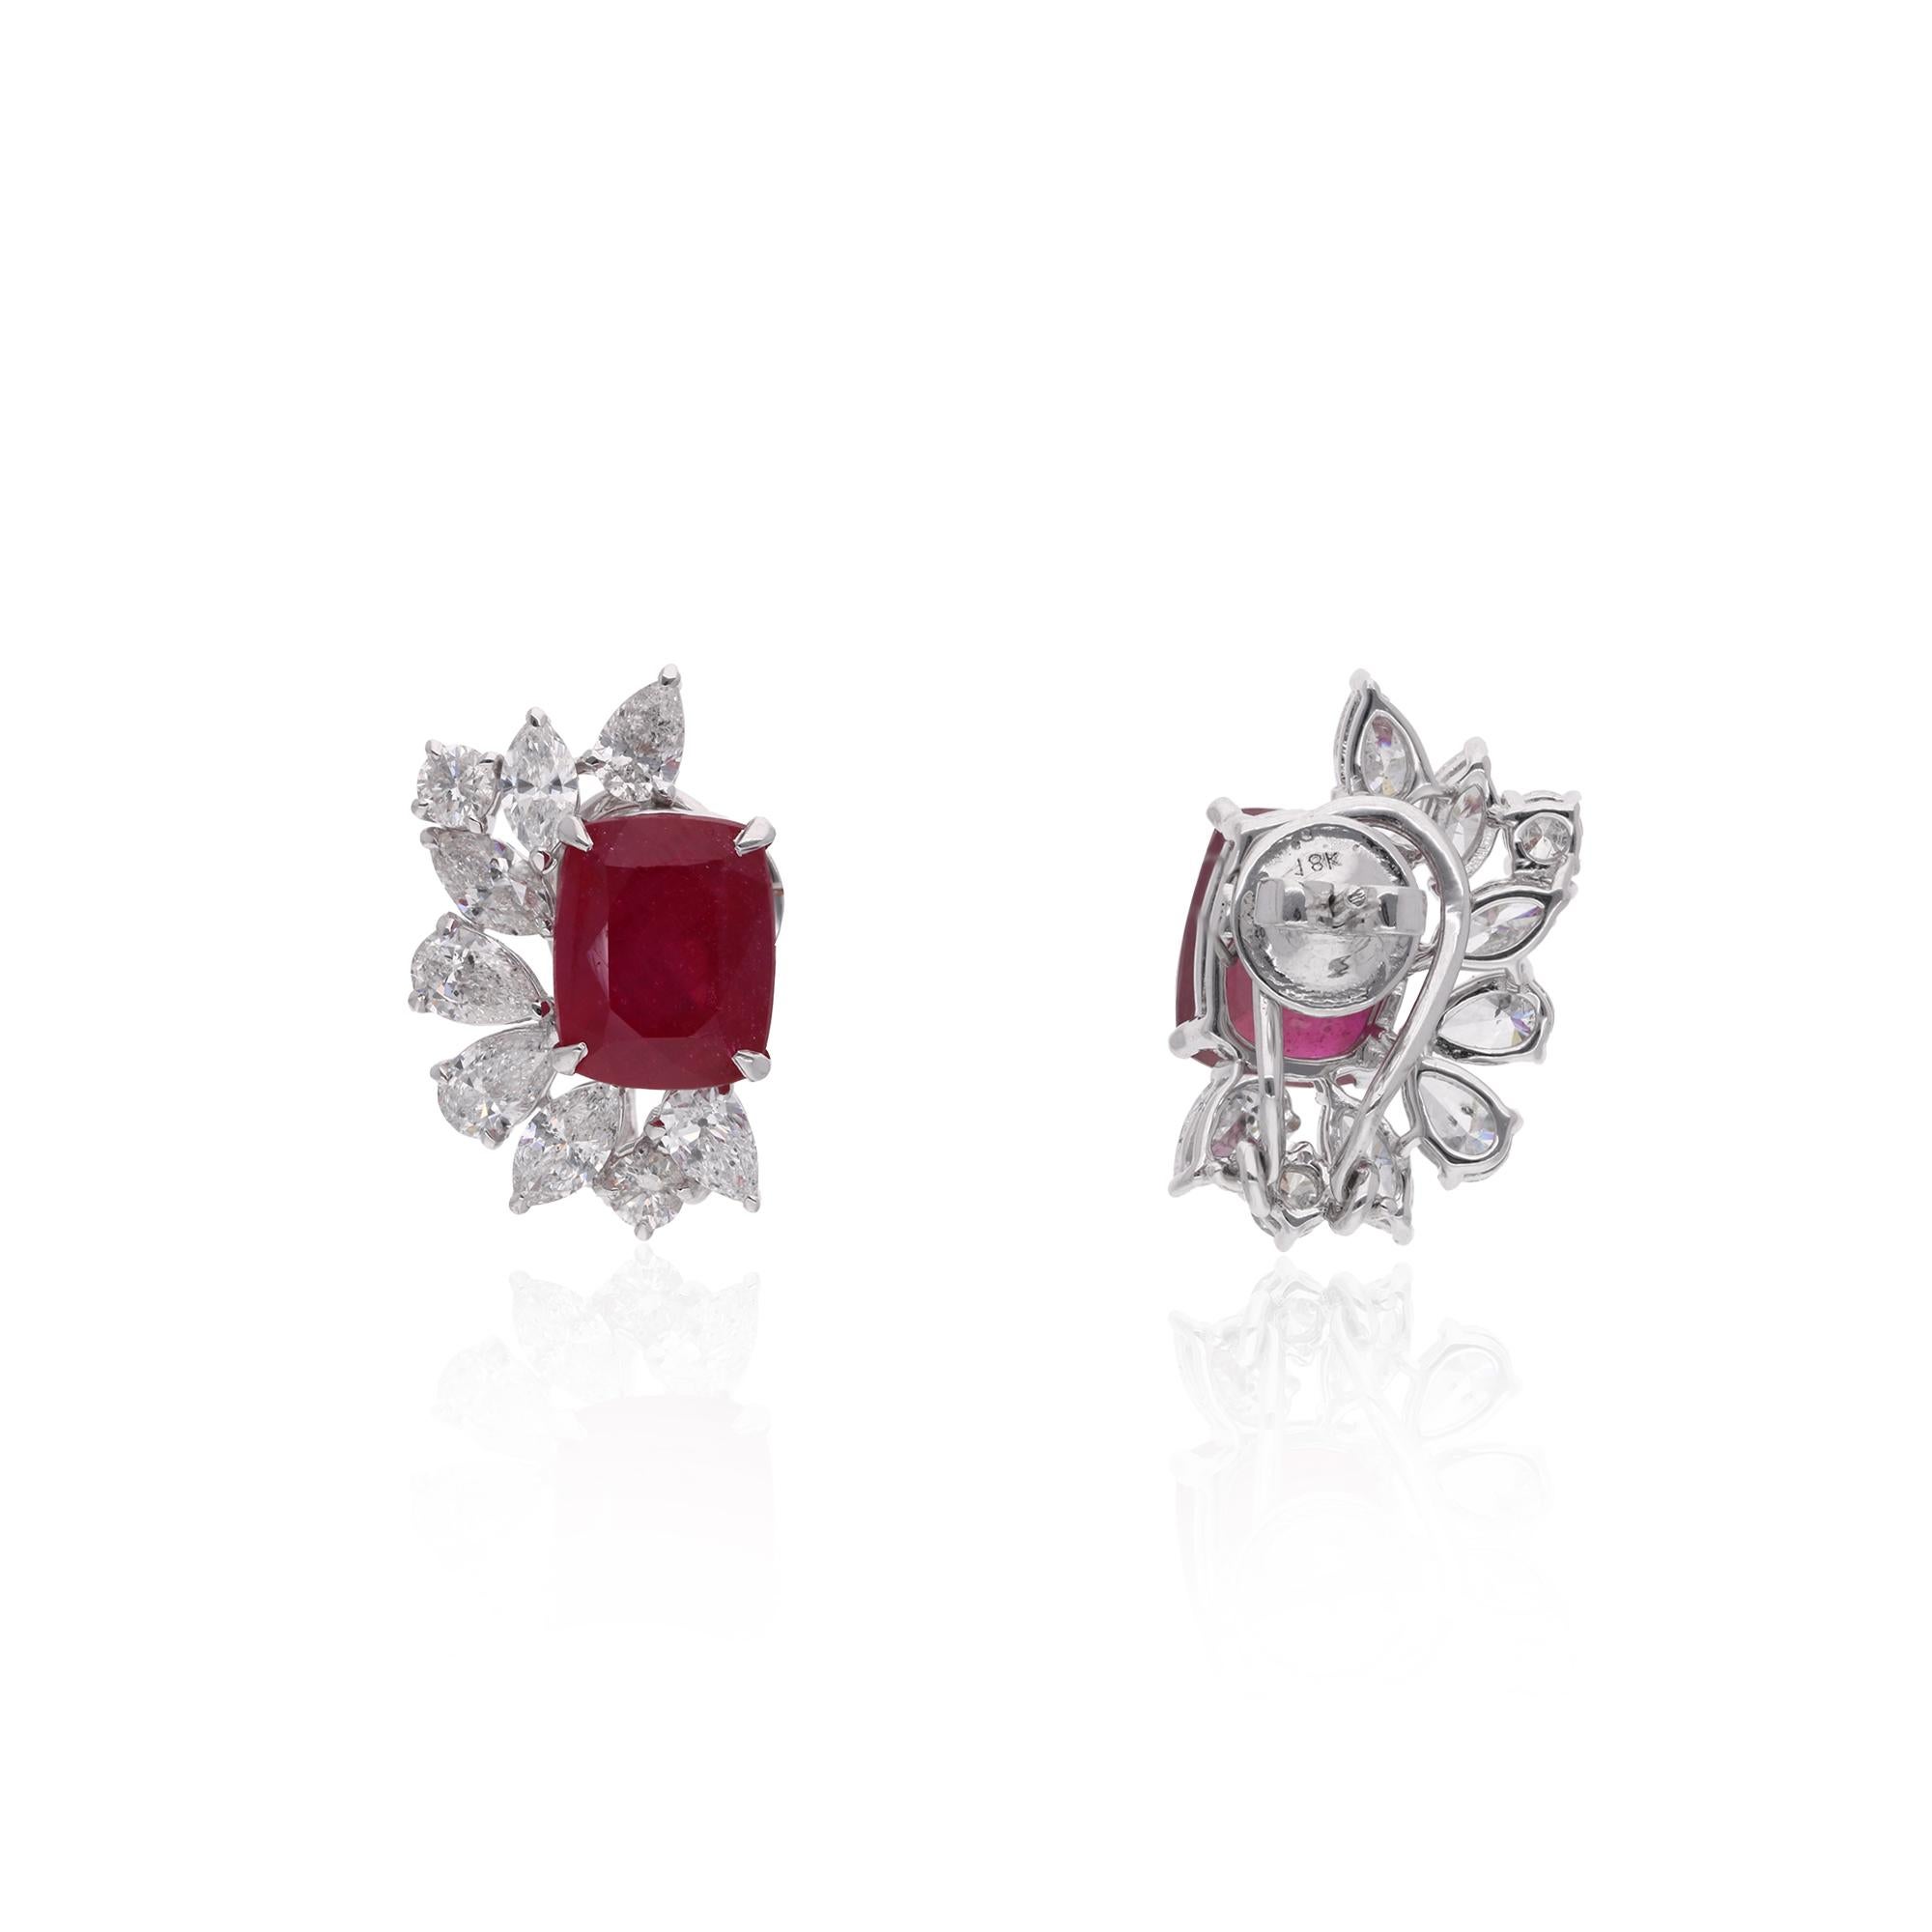 Item Code :- SEE-13534
Gross Wt. :- 9.77 gm
18k Solid White Gold Wt. :- 7.26 gm
Natural Diamond Wt. :- 3.08 Ct. ( AVERAGE DIAMOND CLARITY SI1-SI2 & COLOR H-I )
Red Gemstone Wt. :- 9.47 Ct.
Earrings Size :- 21 mm approx.

✦